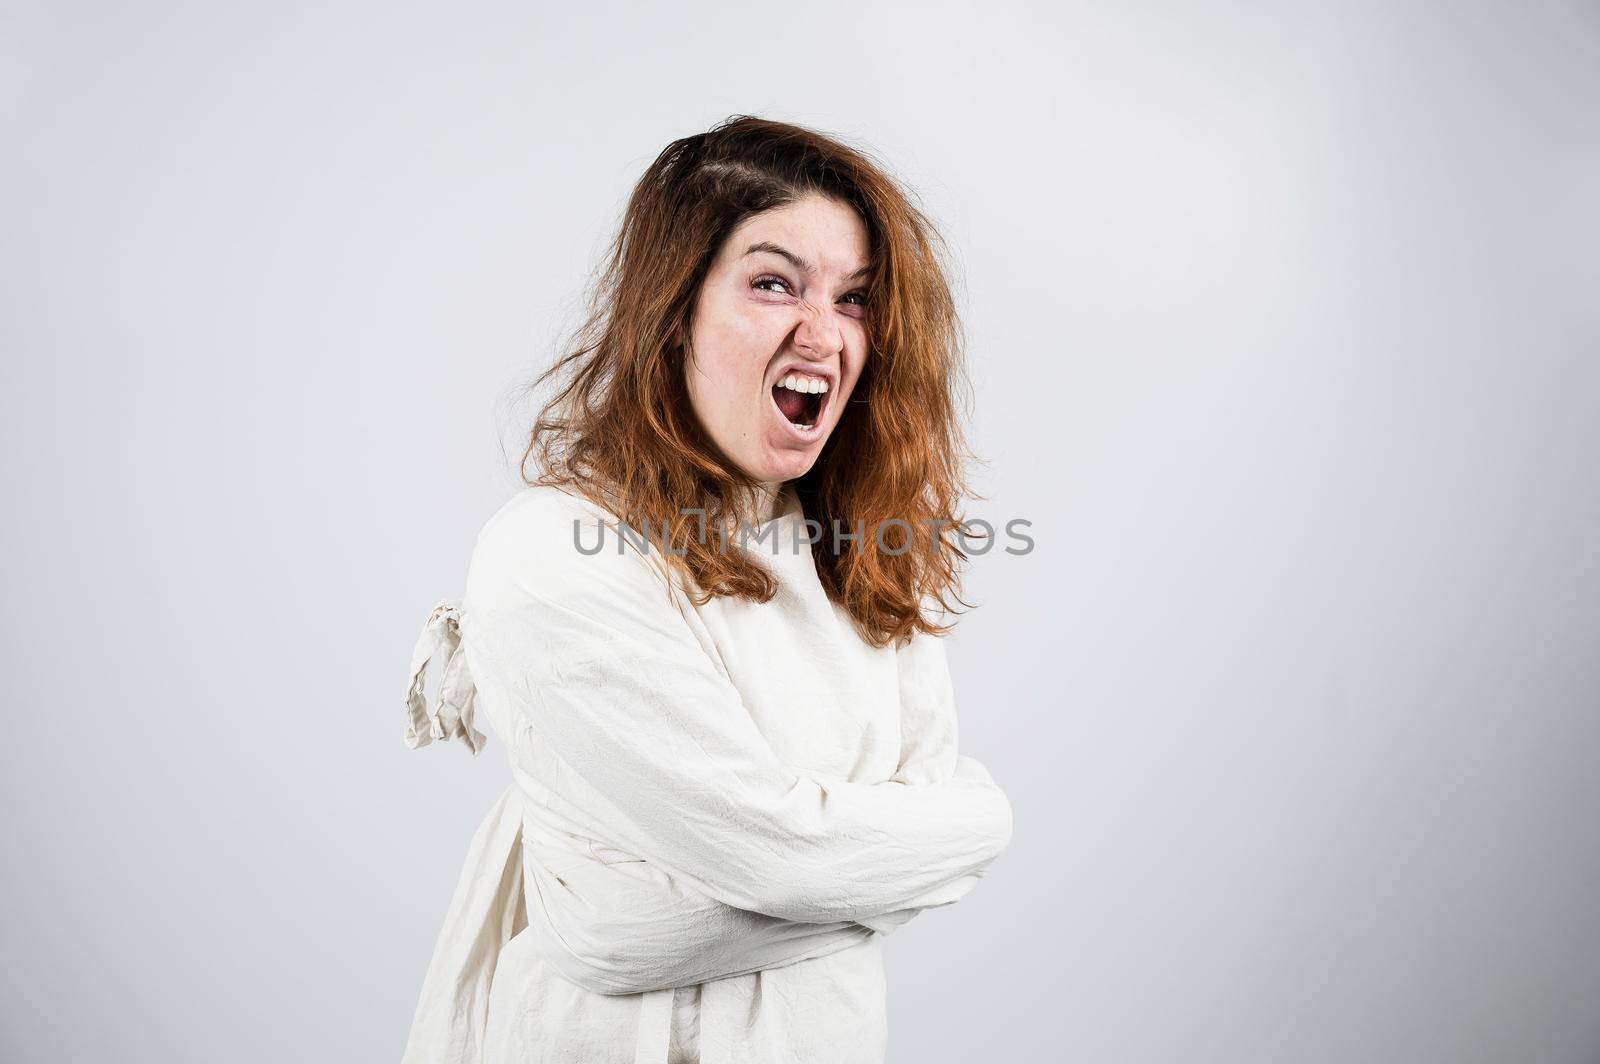 Close-up portrait of insane woman in straitjacket on white background. by mrwed54